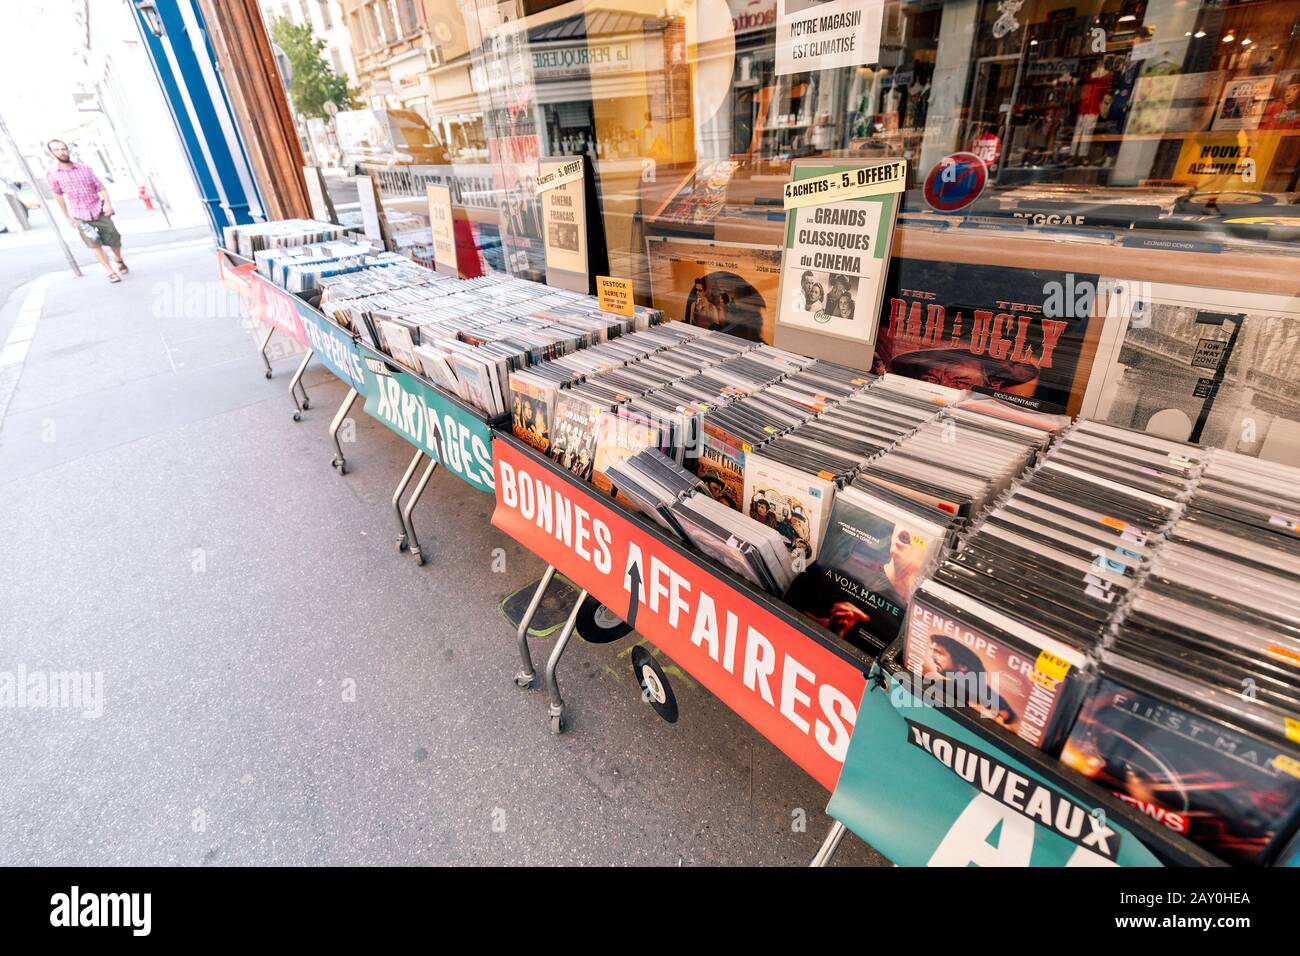 23 July 2019, Lyon, France: Old dvd movies for sale at outdoor flea market  at the city street Stock Photo - Alamy